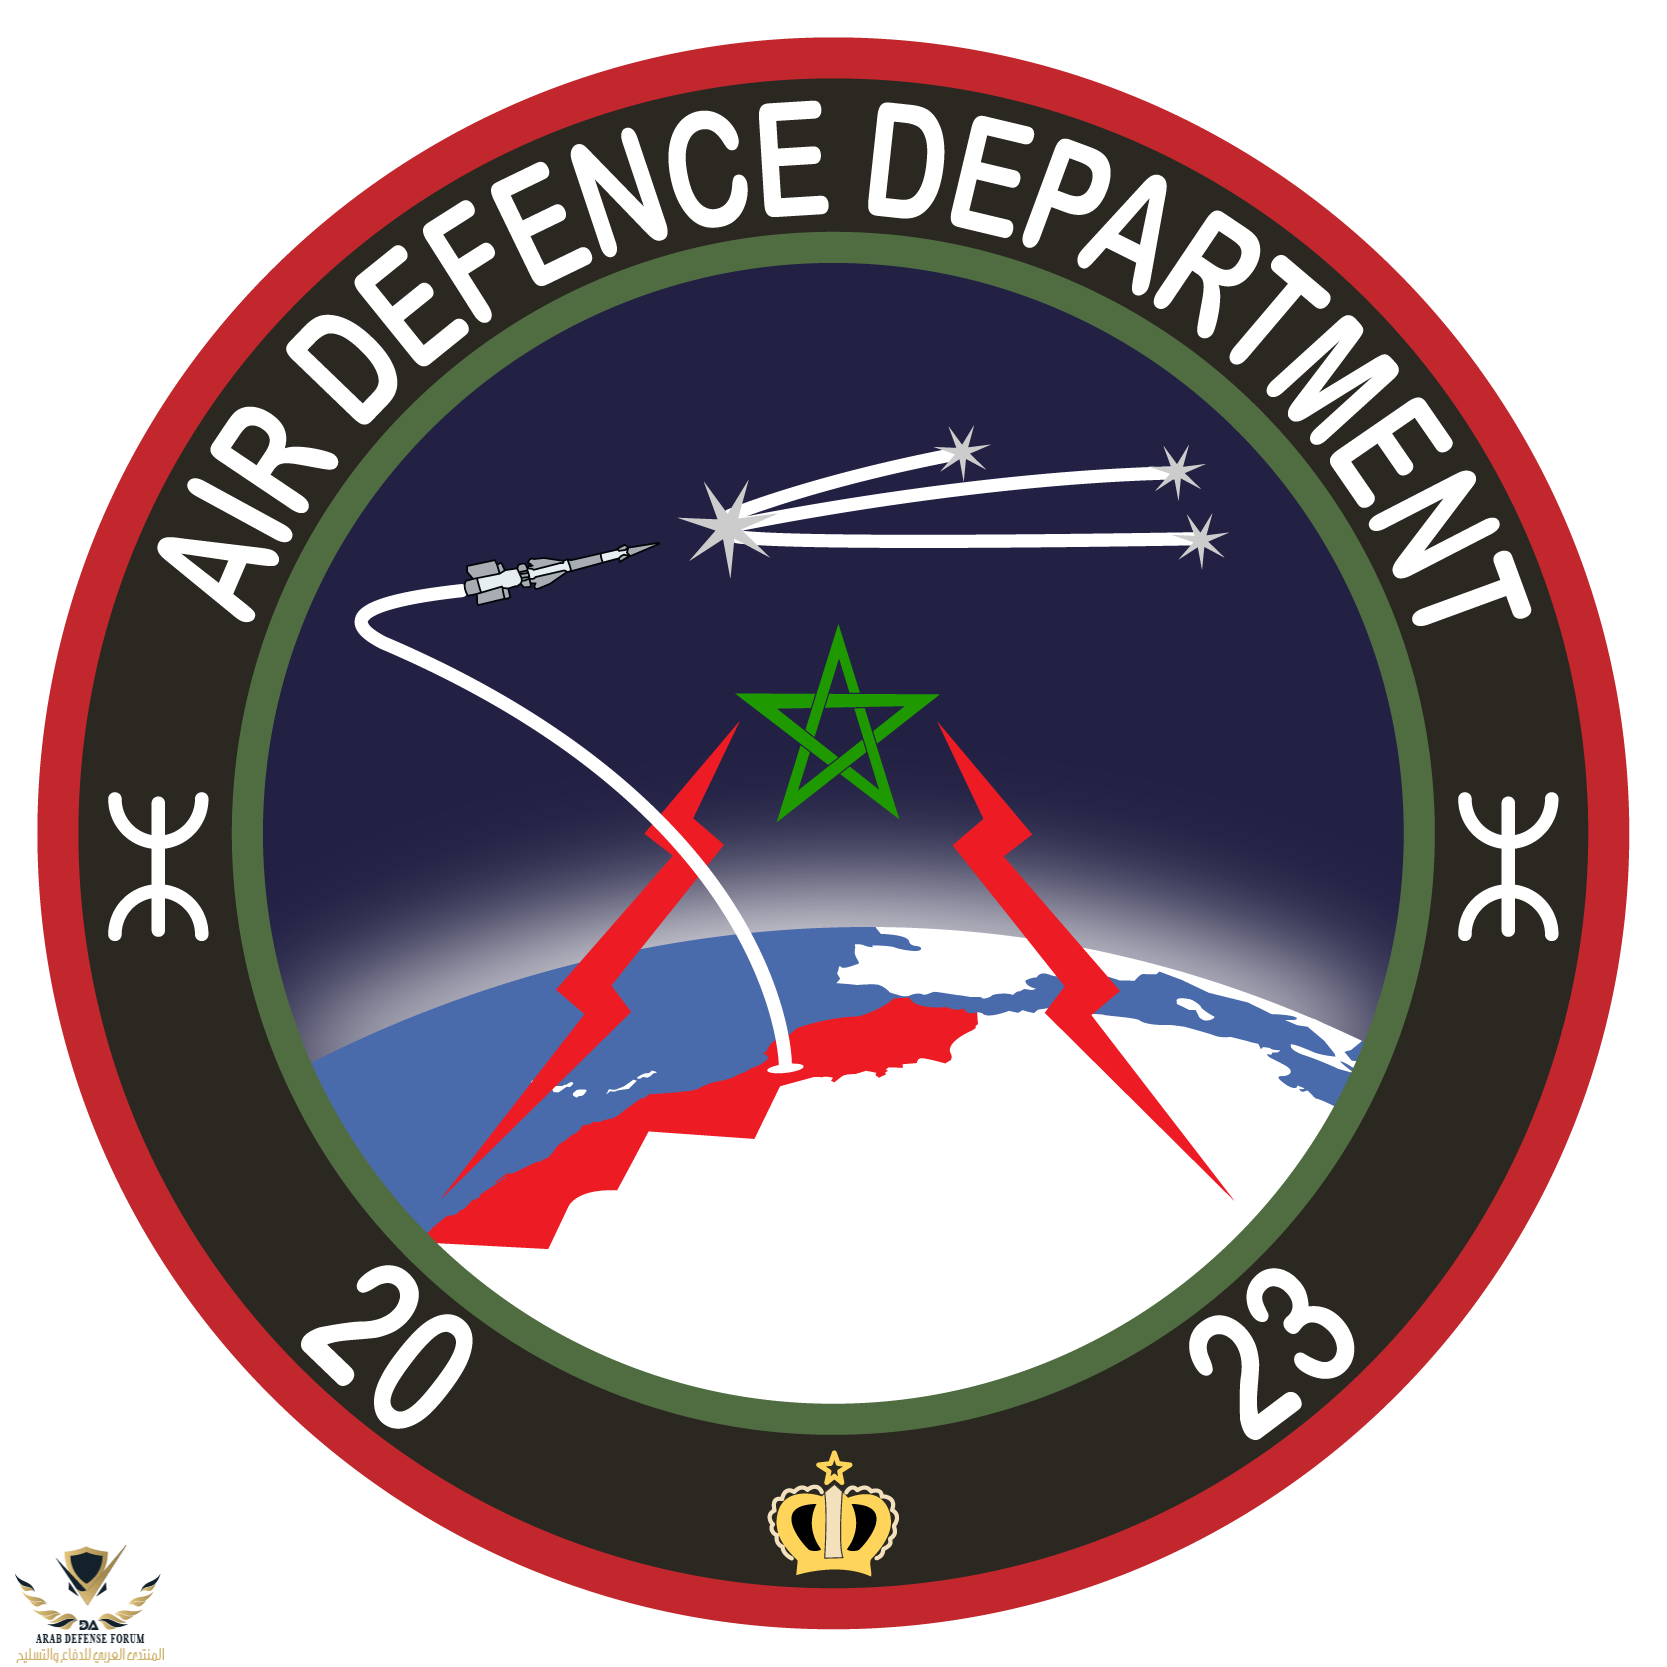 morocco air force logo [Recovered] 11-02-01.png